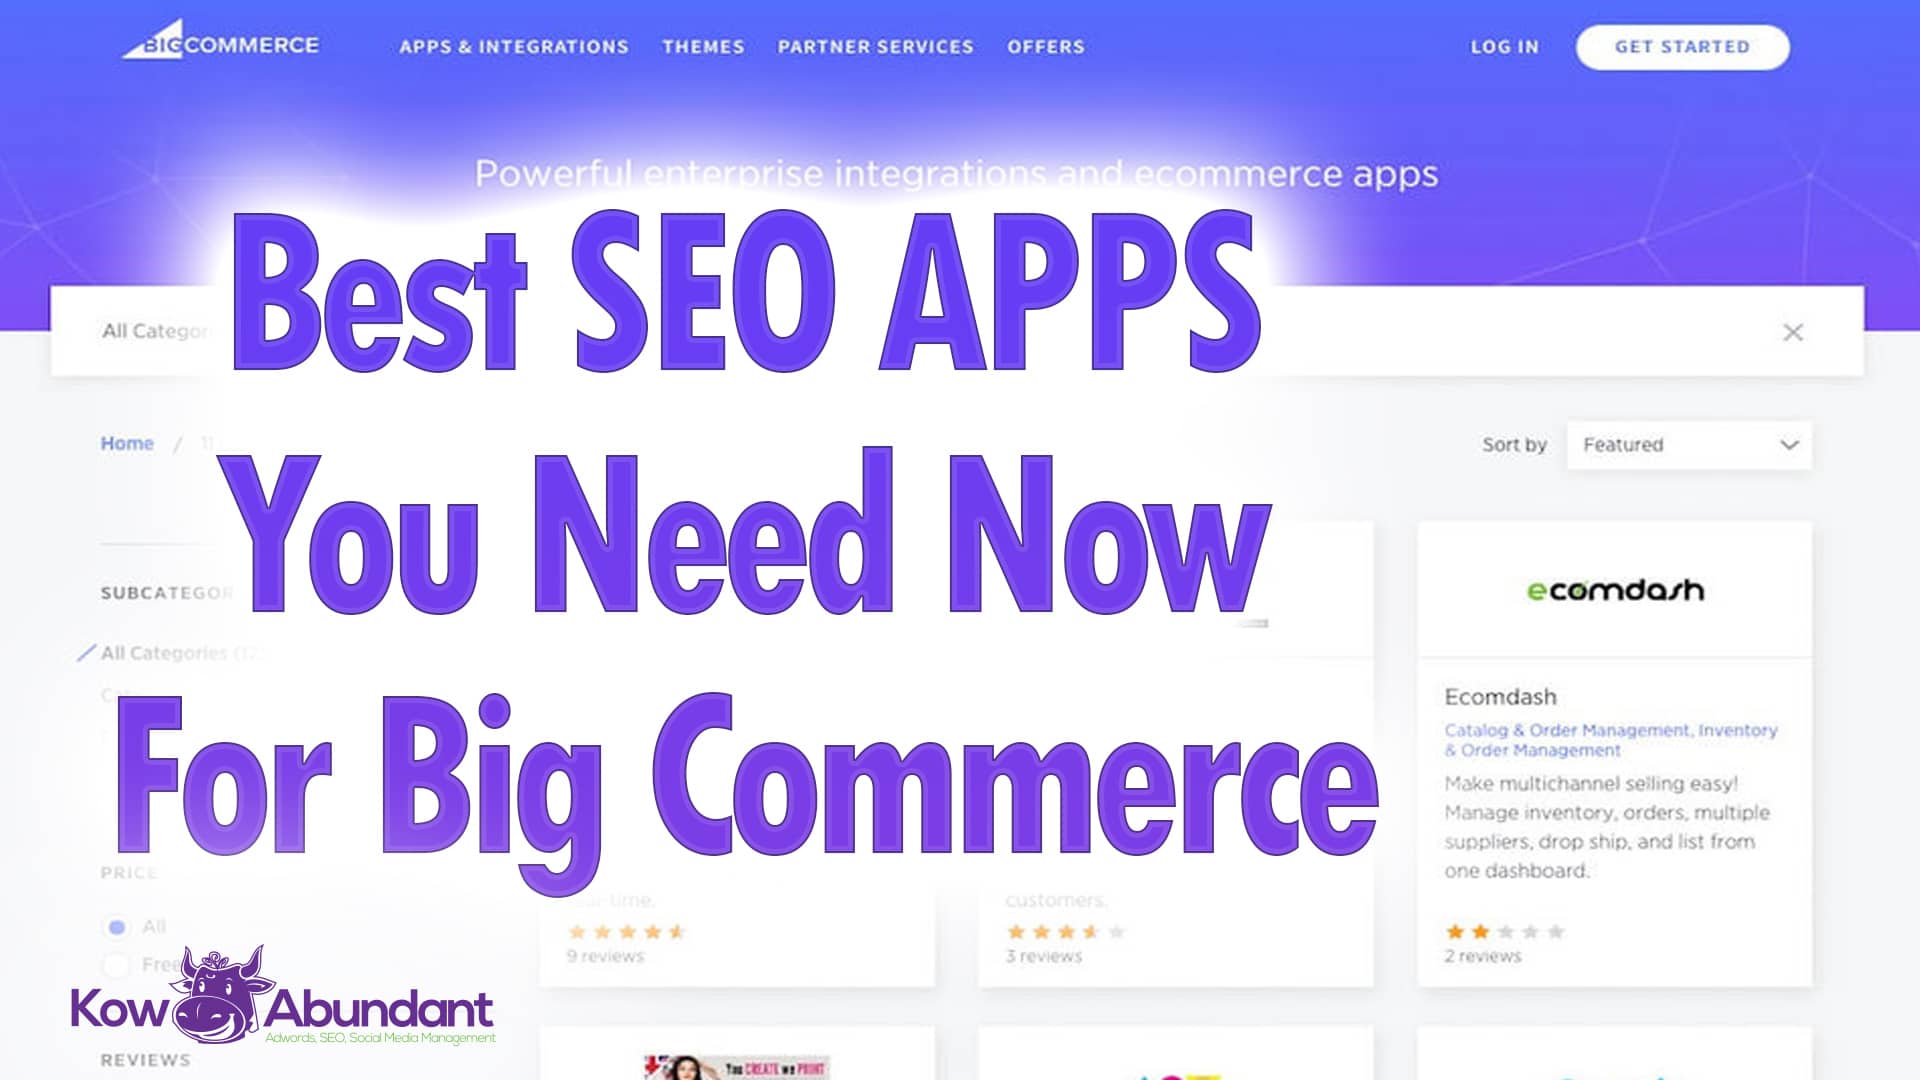 Best SEO apps You need now for Big Commerce